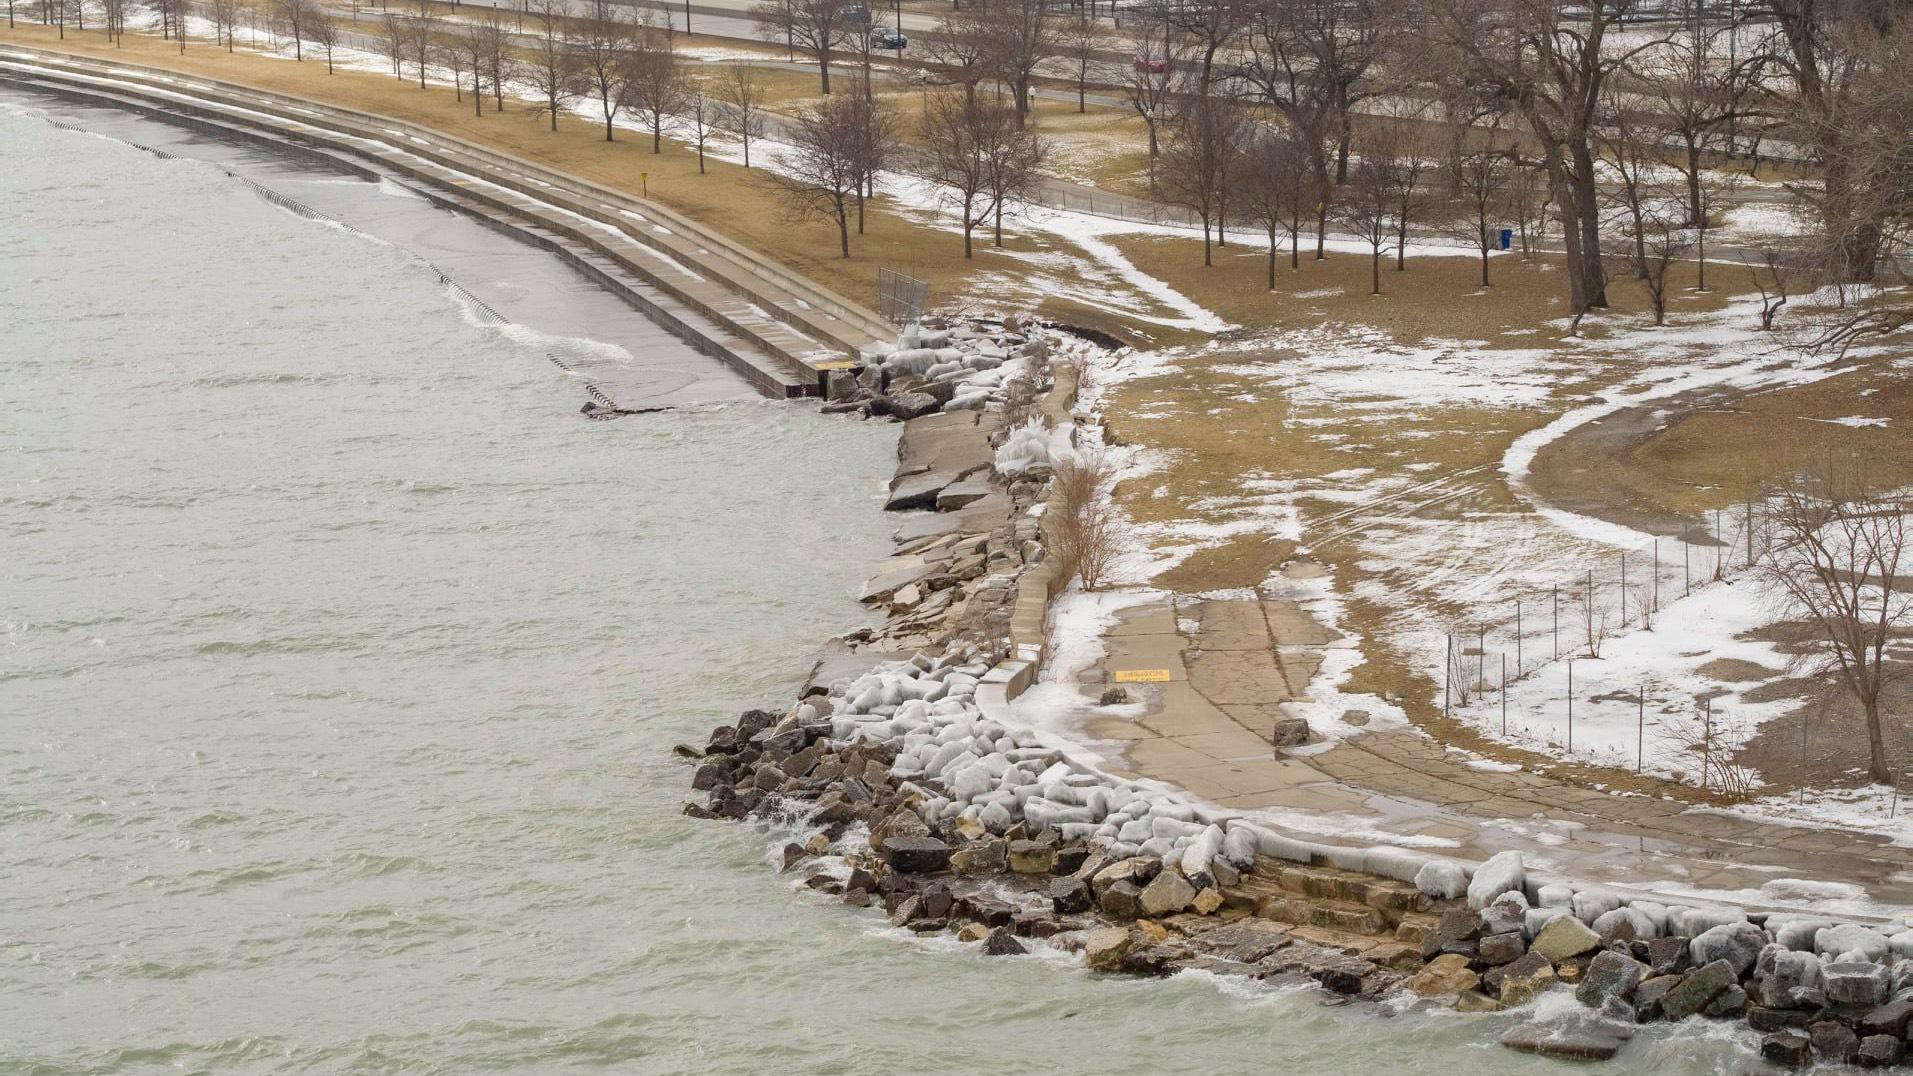 Repairs are just getting underway on a stretch of lakefront damaged by a storm in January 2020. (Courtesy of Metropolitan Water Reclamation District)